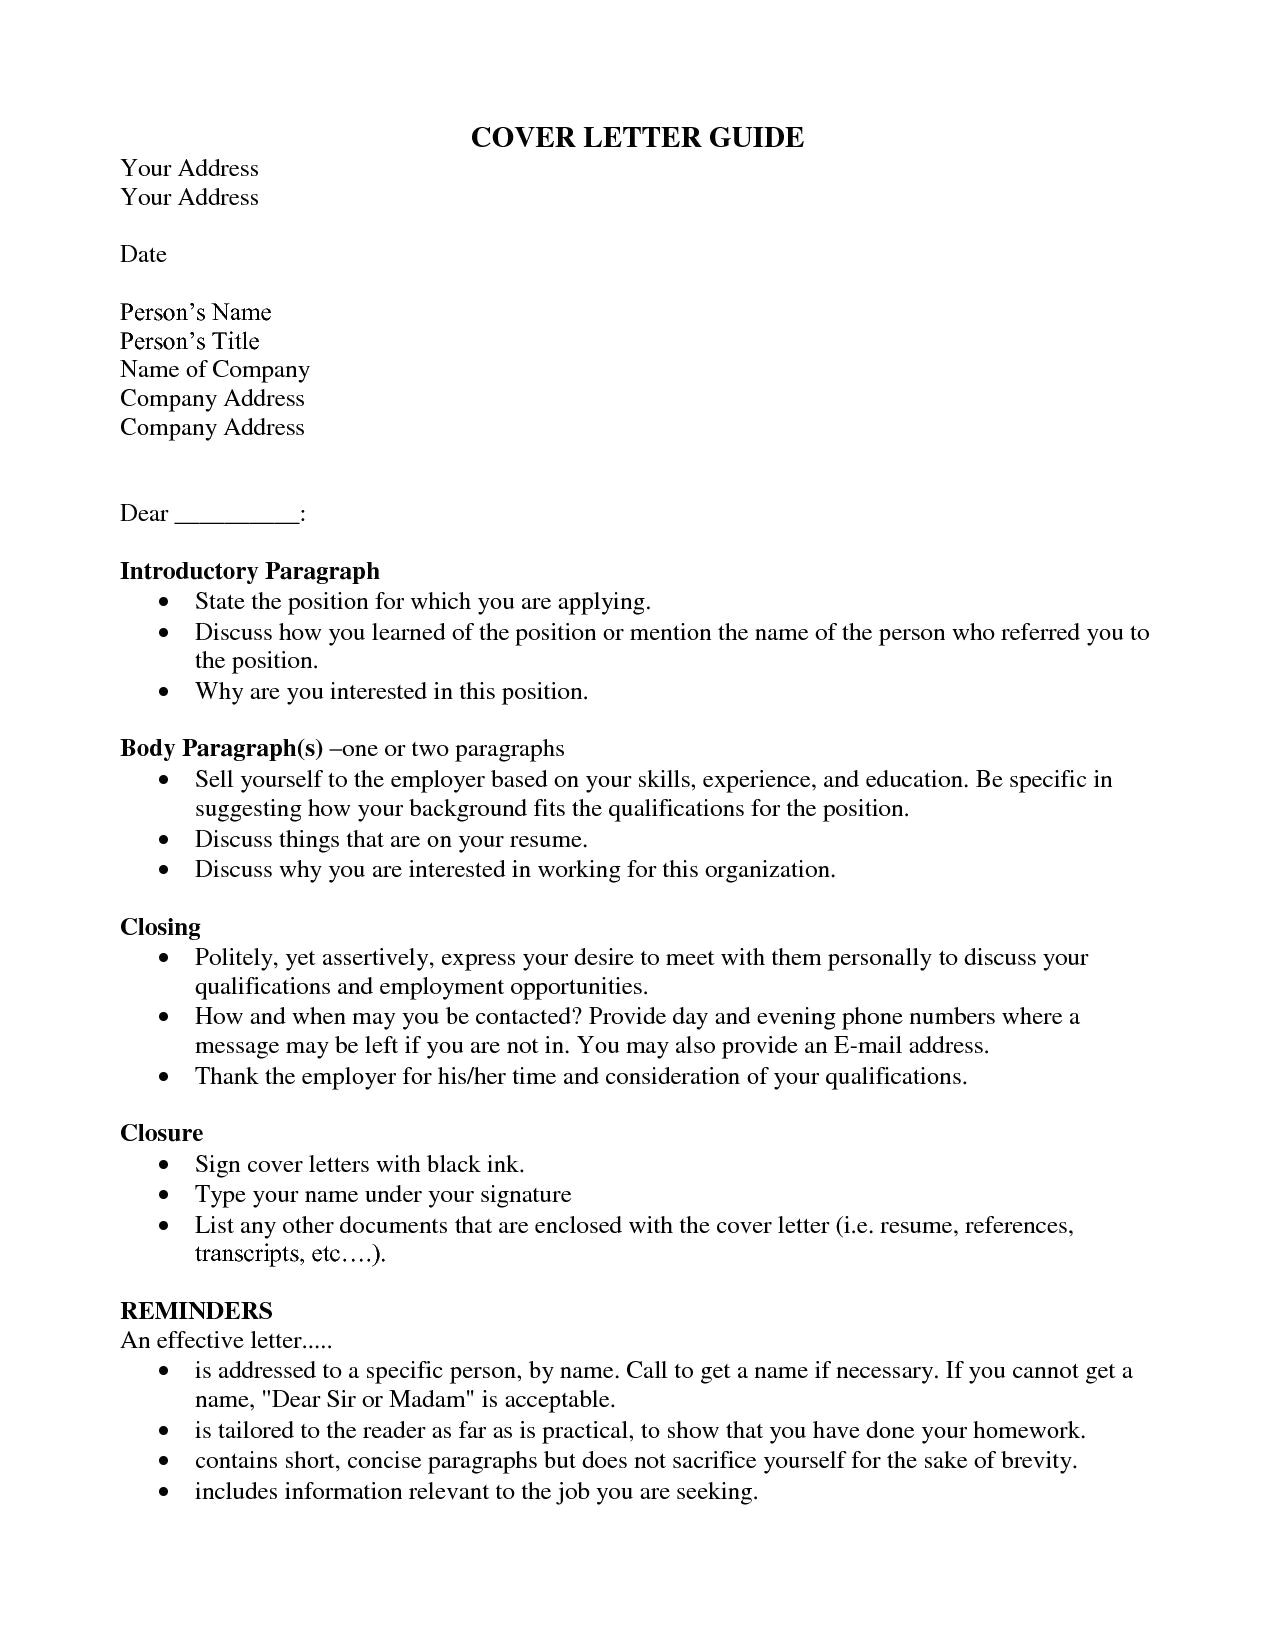 cover letter template to unknown person